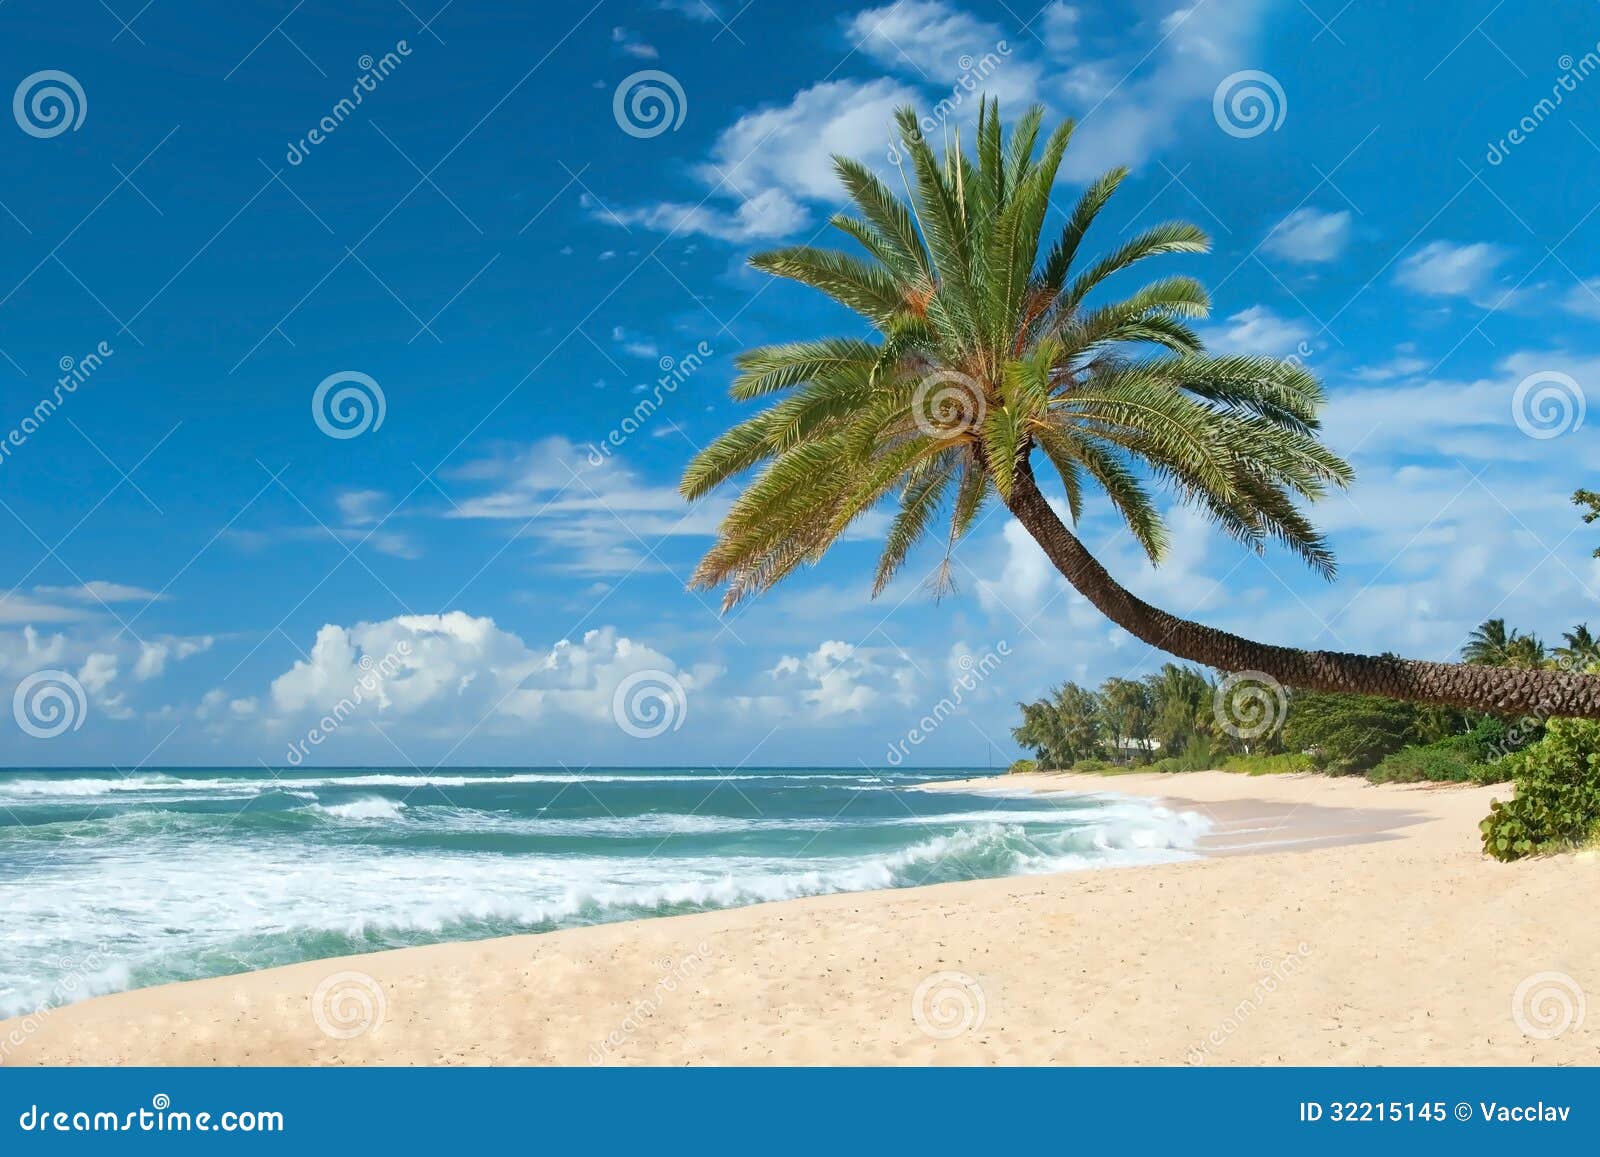 untouched sandy beach with palms trees and azure ocean